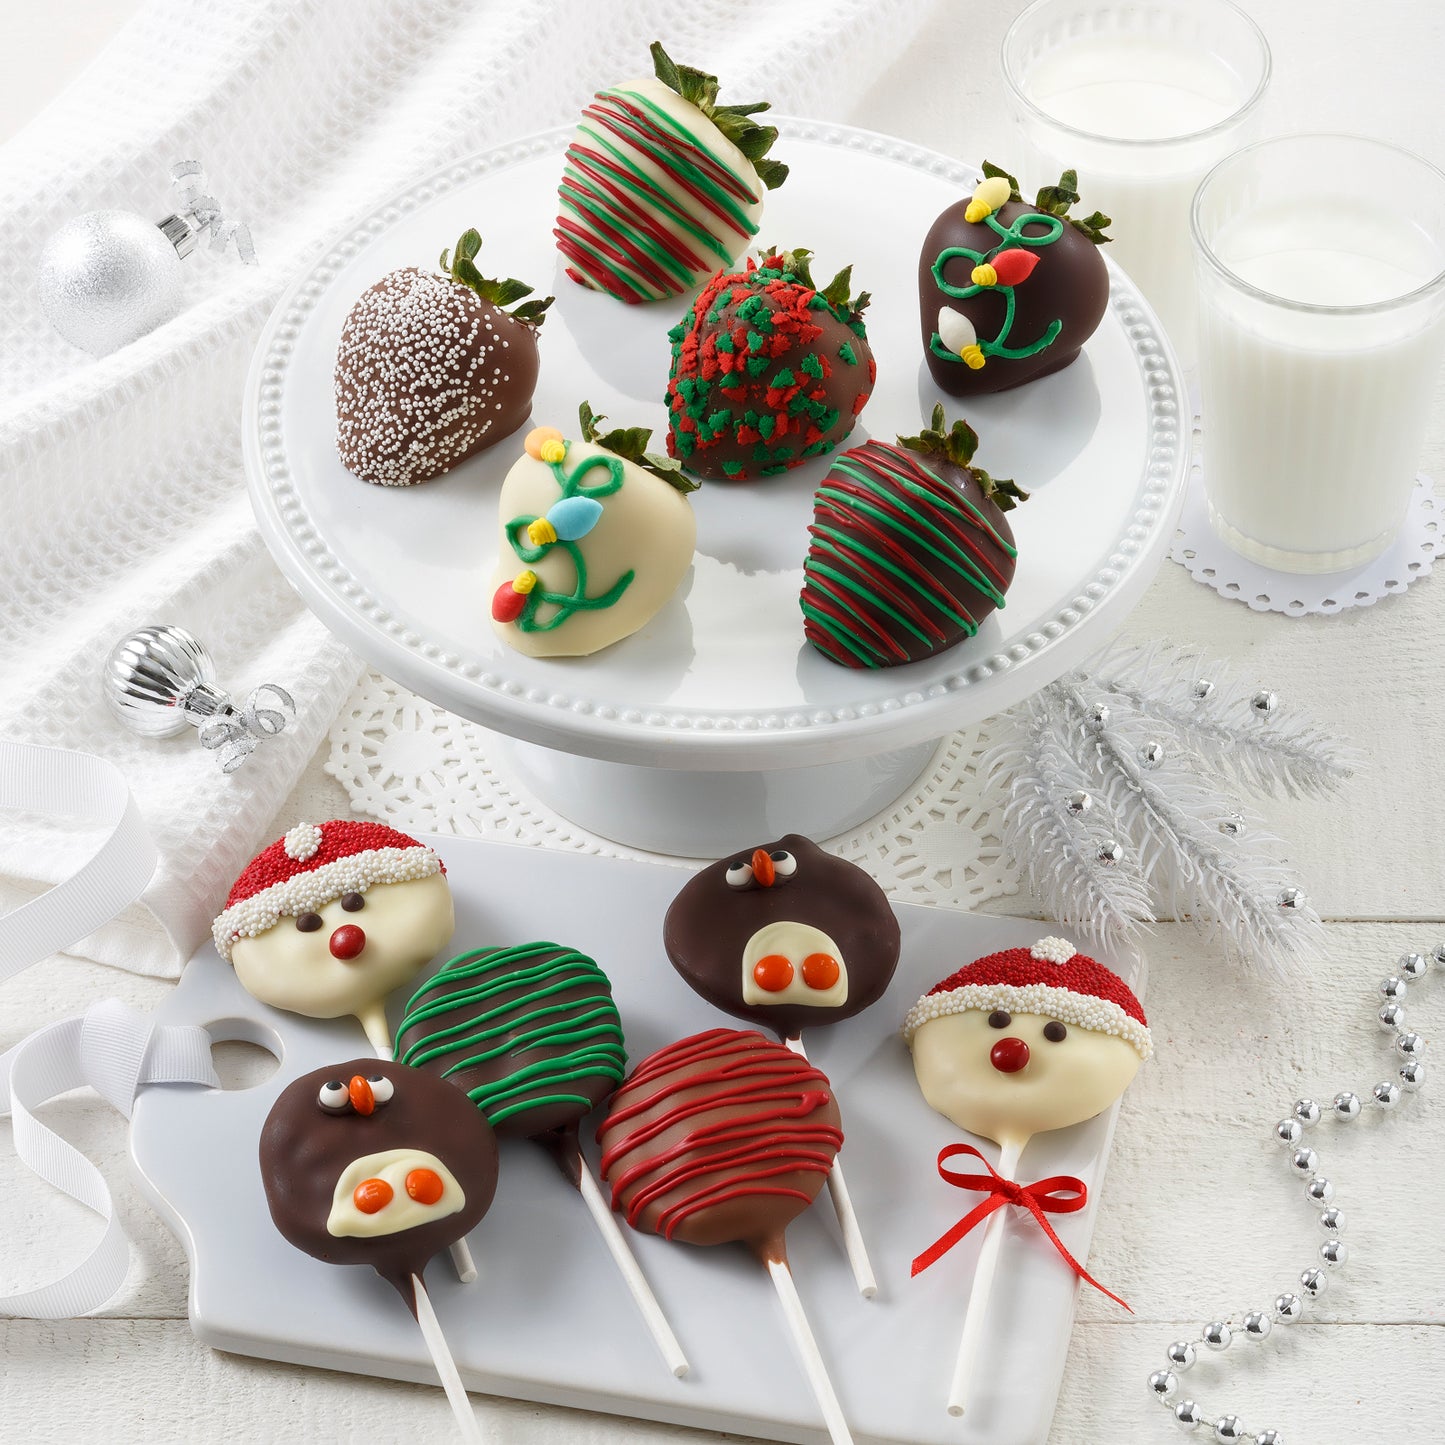 Six chocolate-covered strawberries and six chocolate-covered Nibbler® pop that are all decorated in a holiday theme